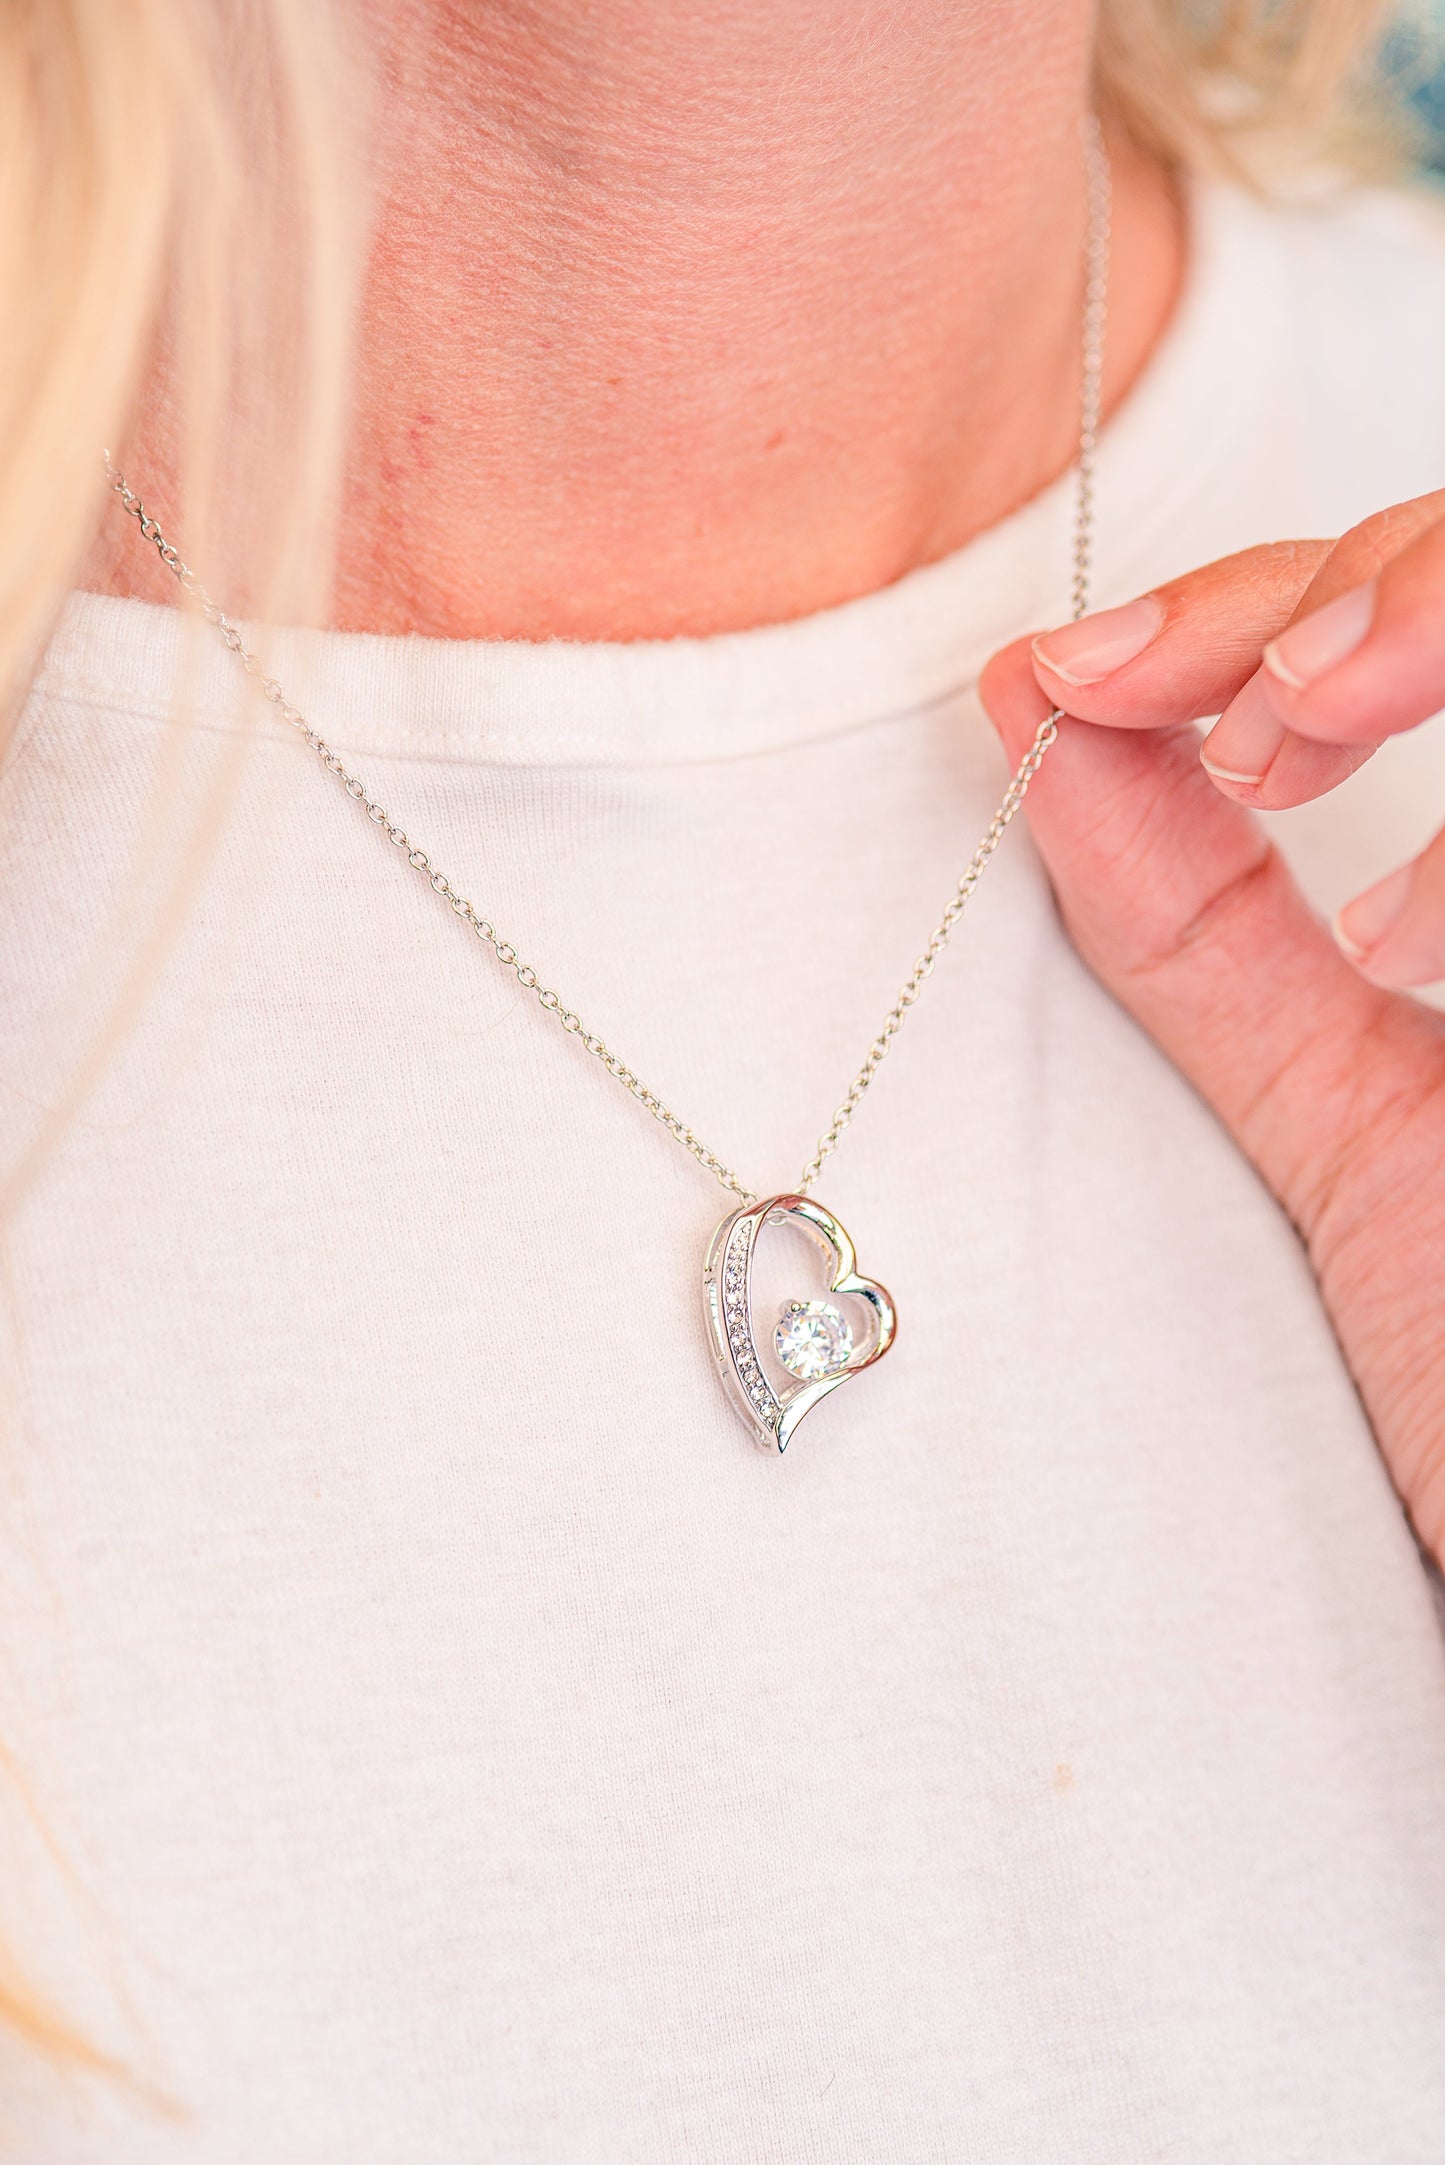 Mother's Day "I Carry You In My Heart" Forever Love Necklace